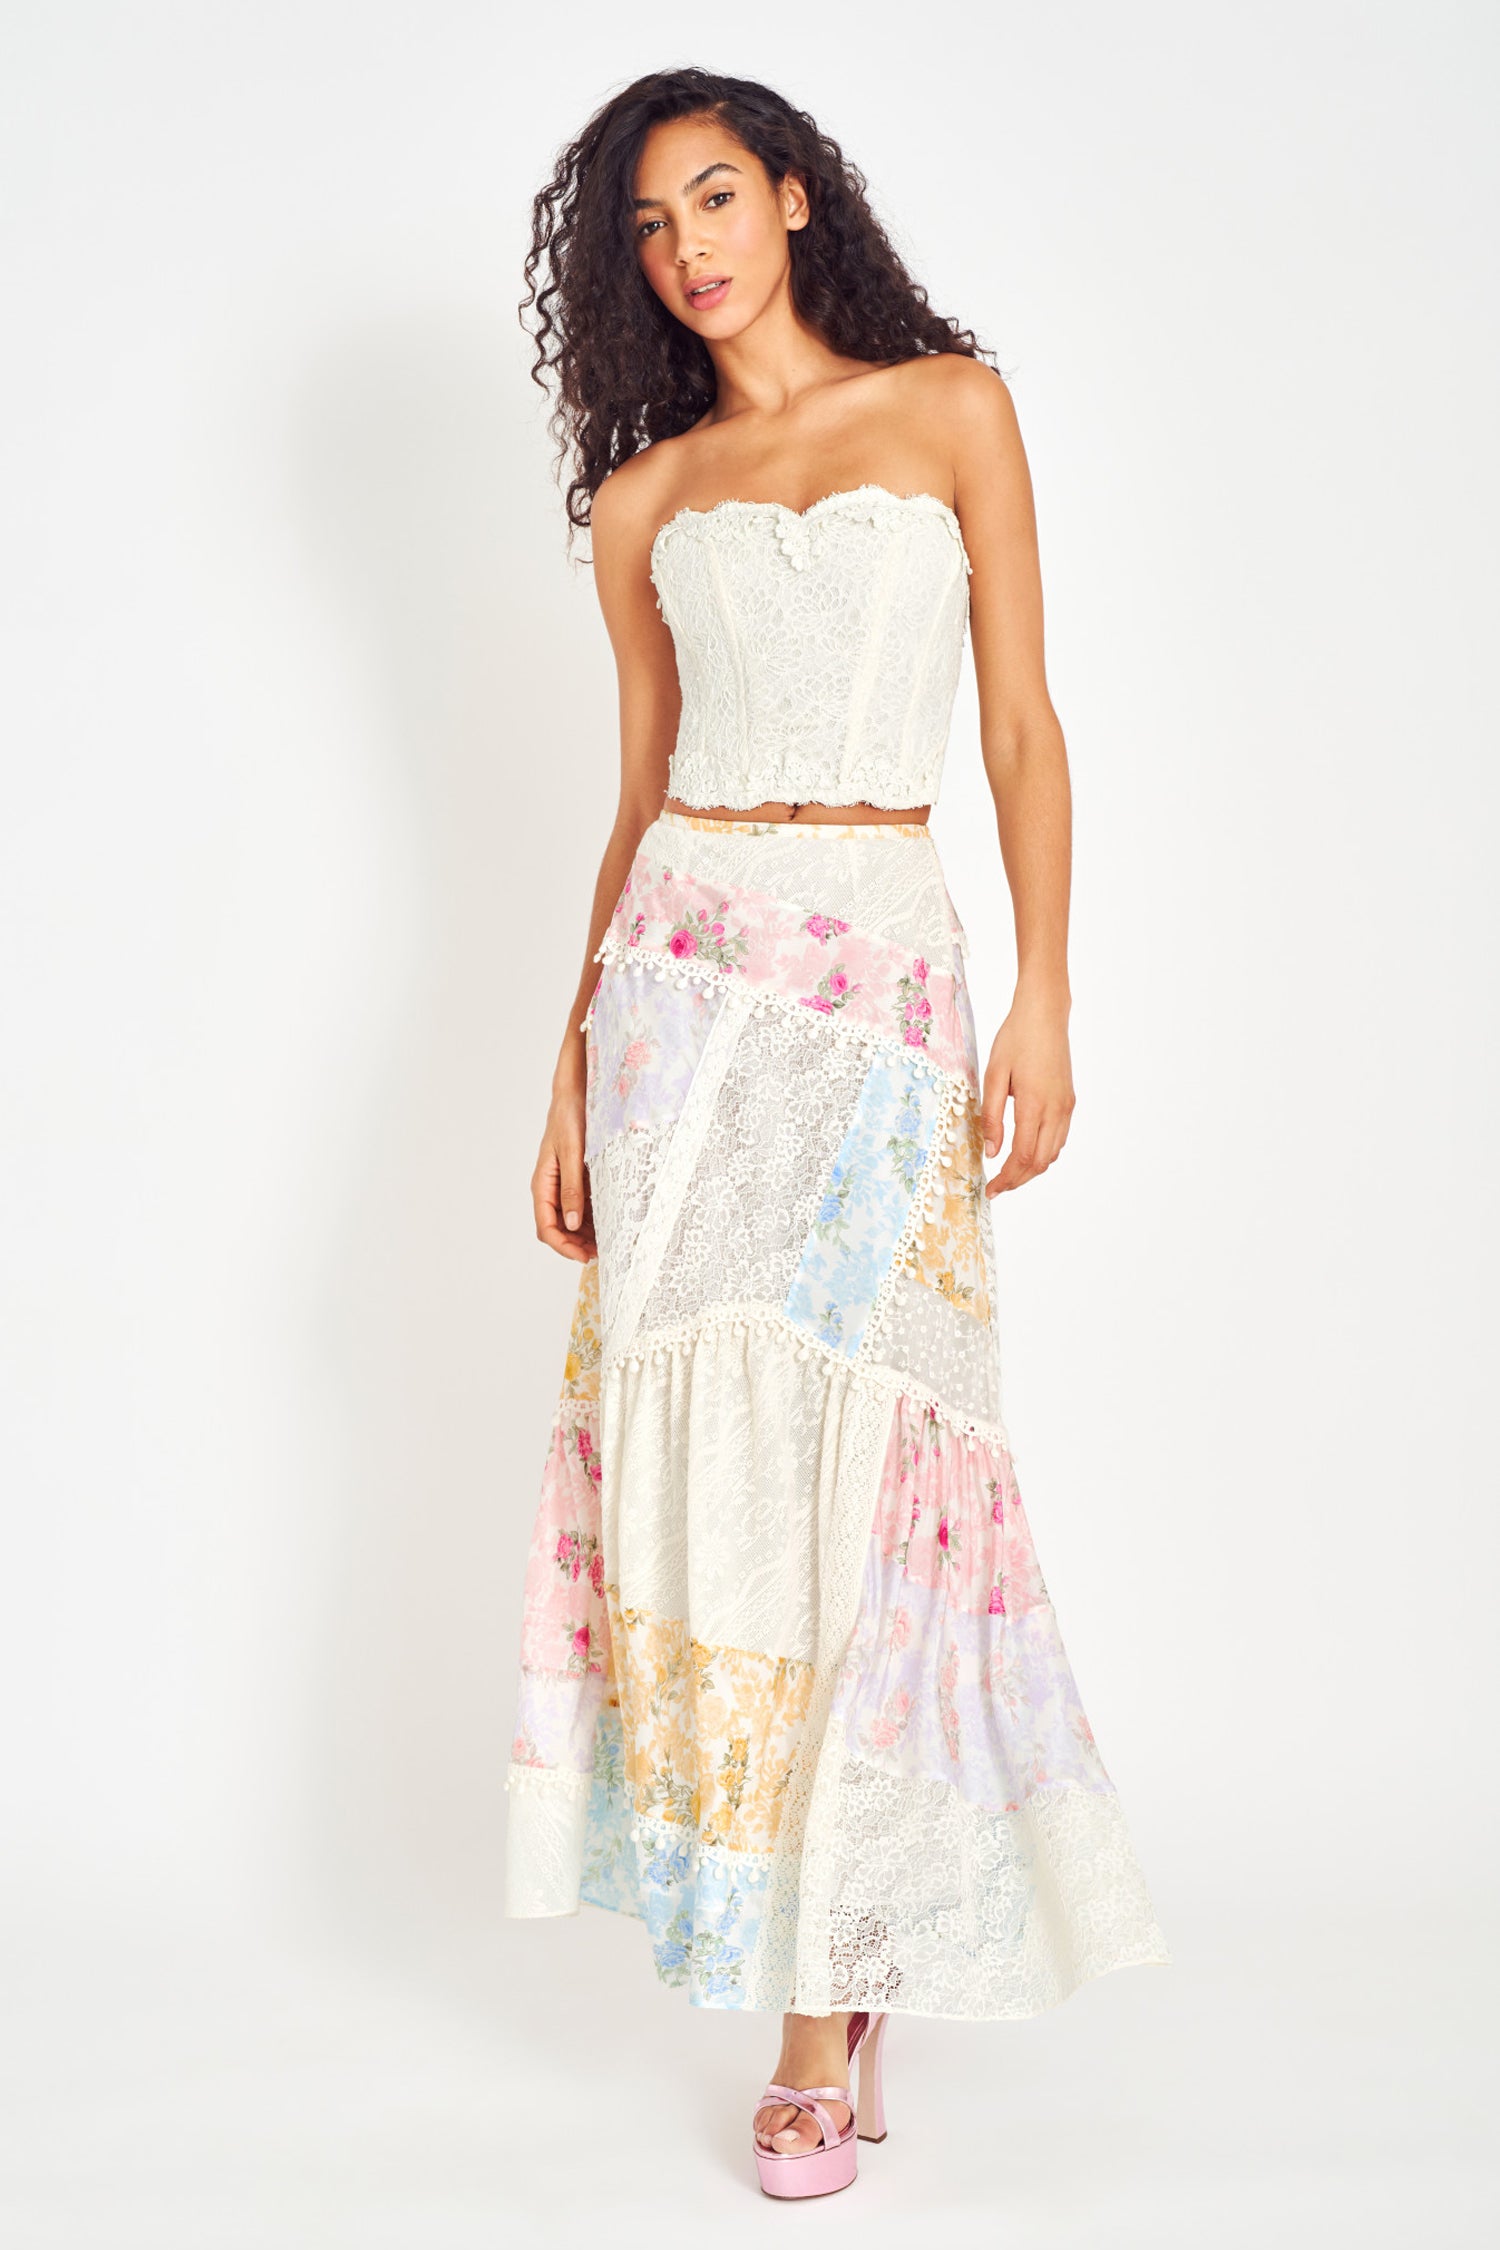 Lace detail contrasting print maxi flounce skirt.